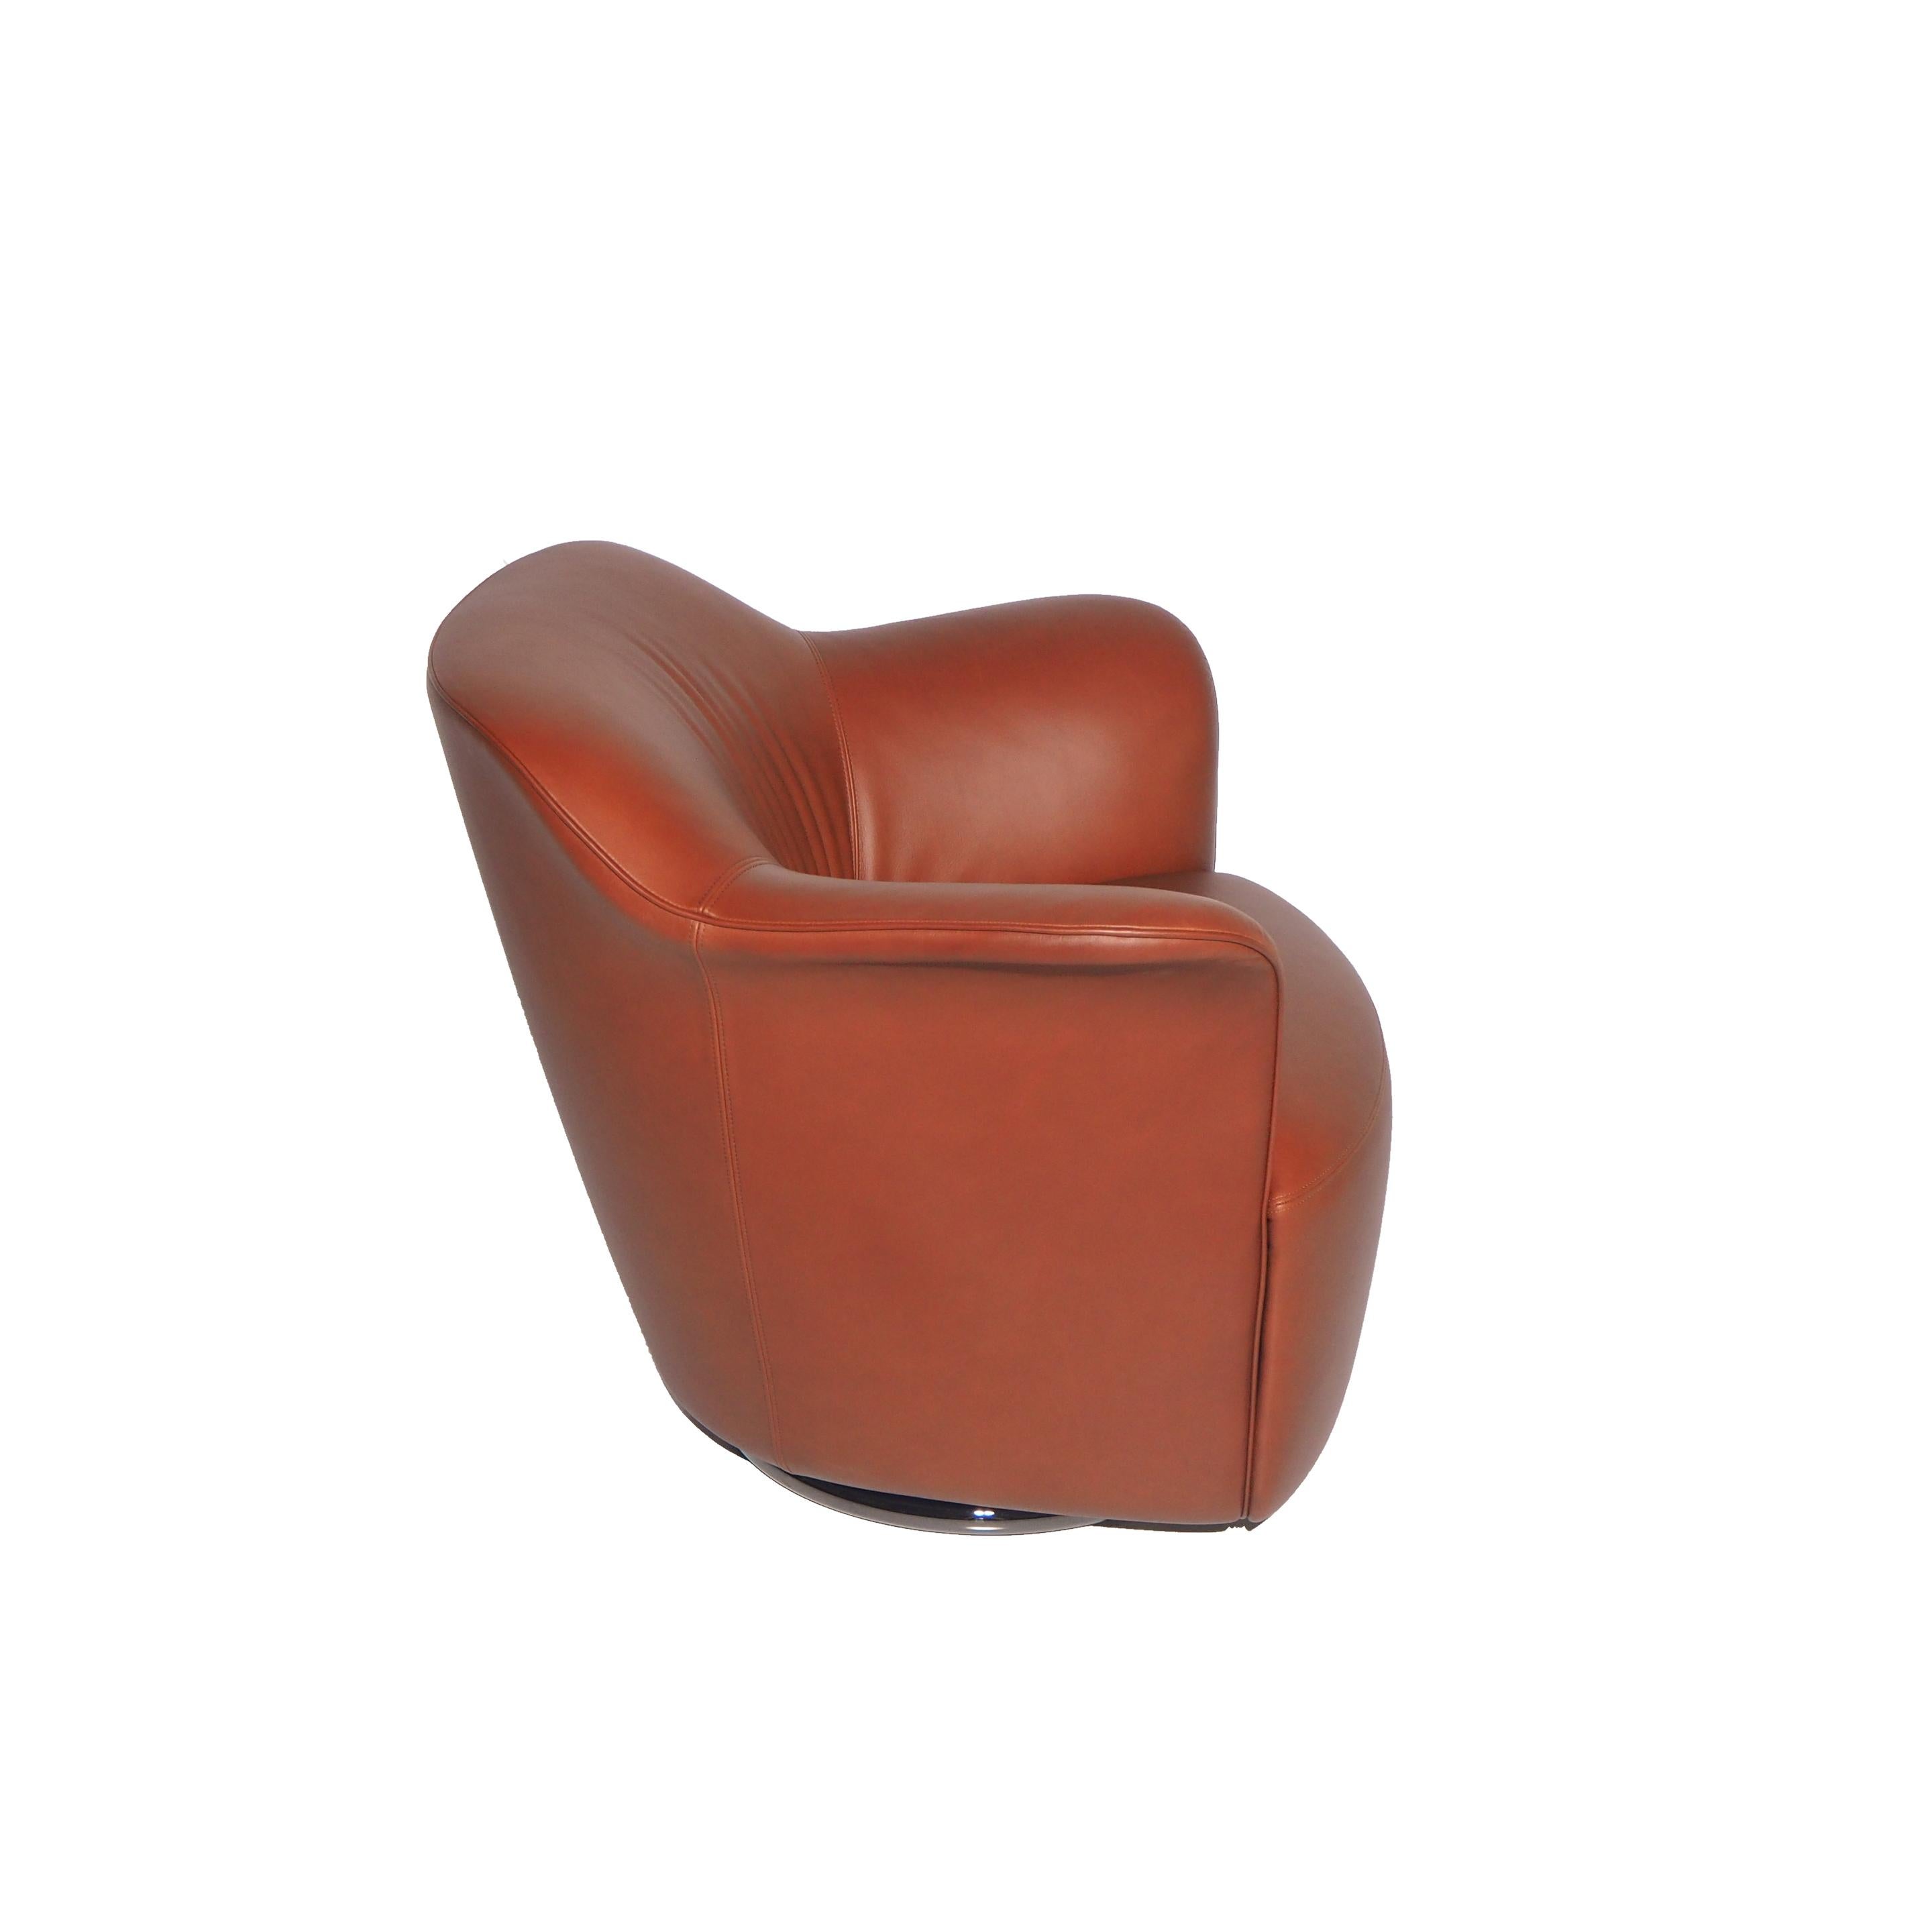 Modern Aida Amrchair in Genuine Leather Soul Diana Red-Brown and Metal Base For Sale